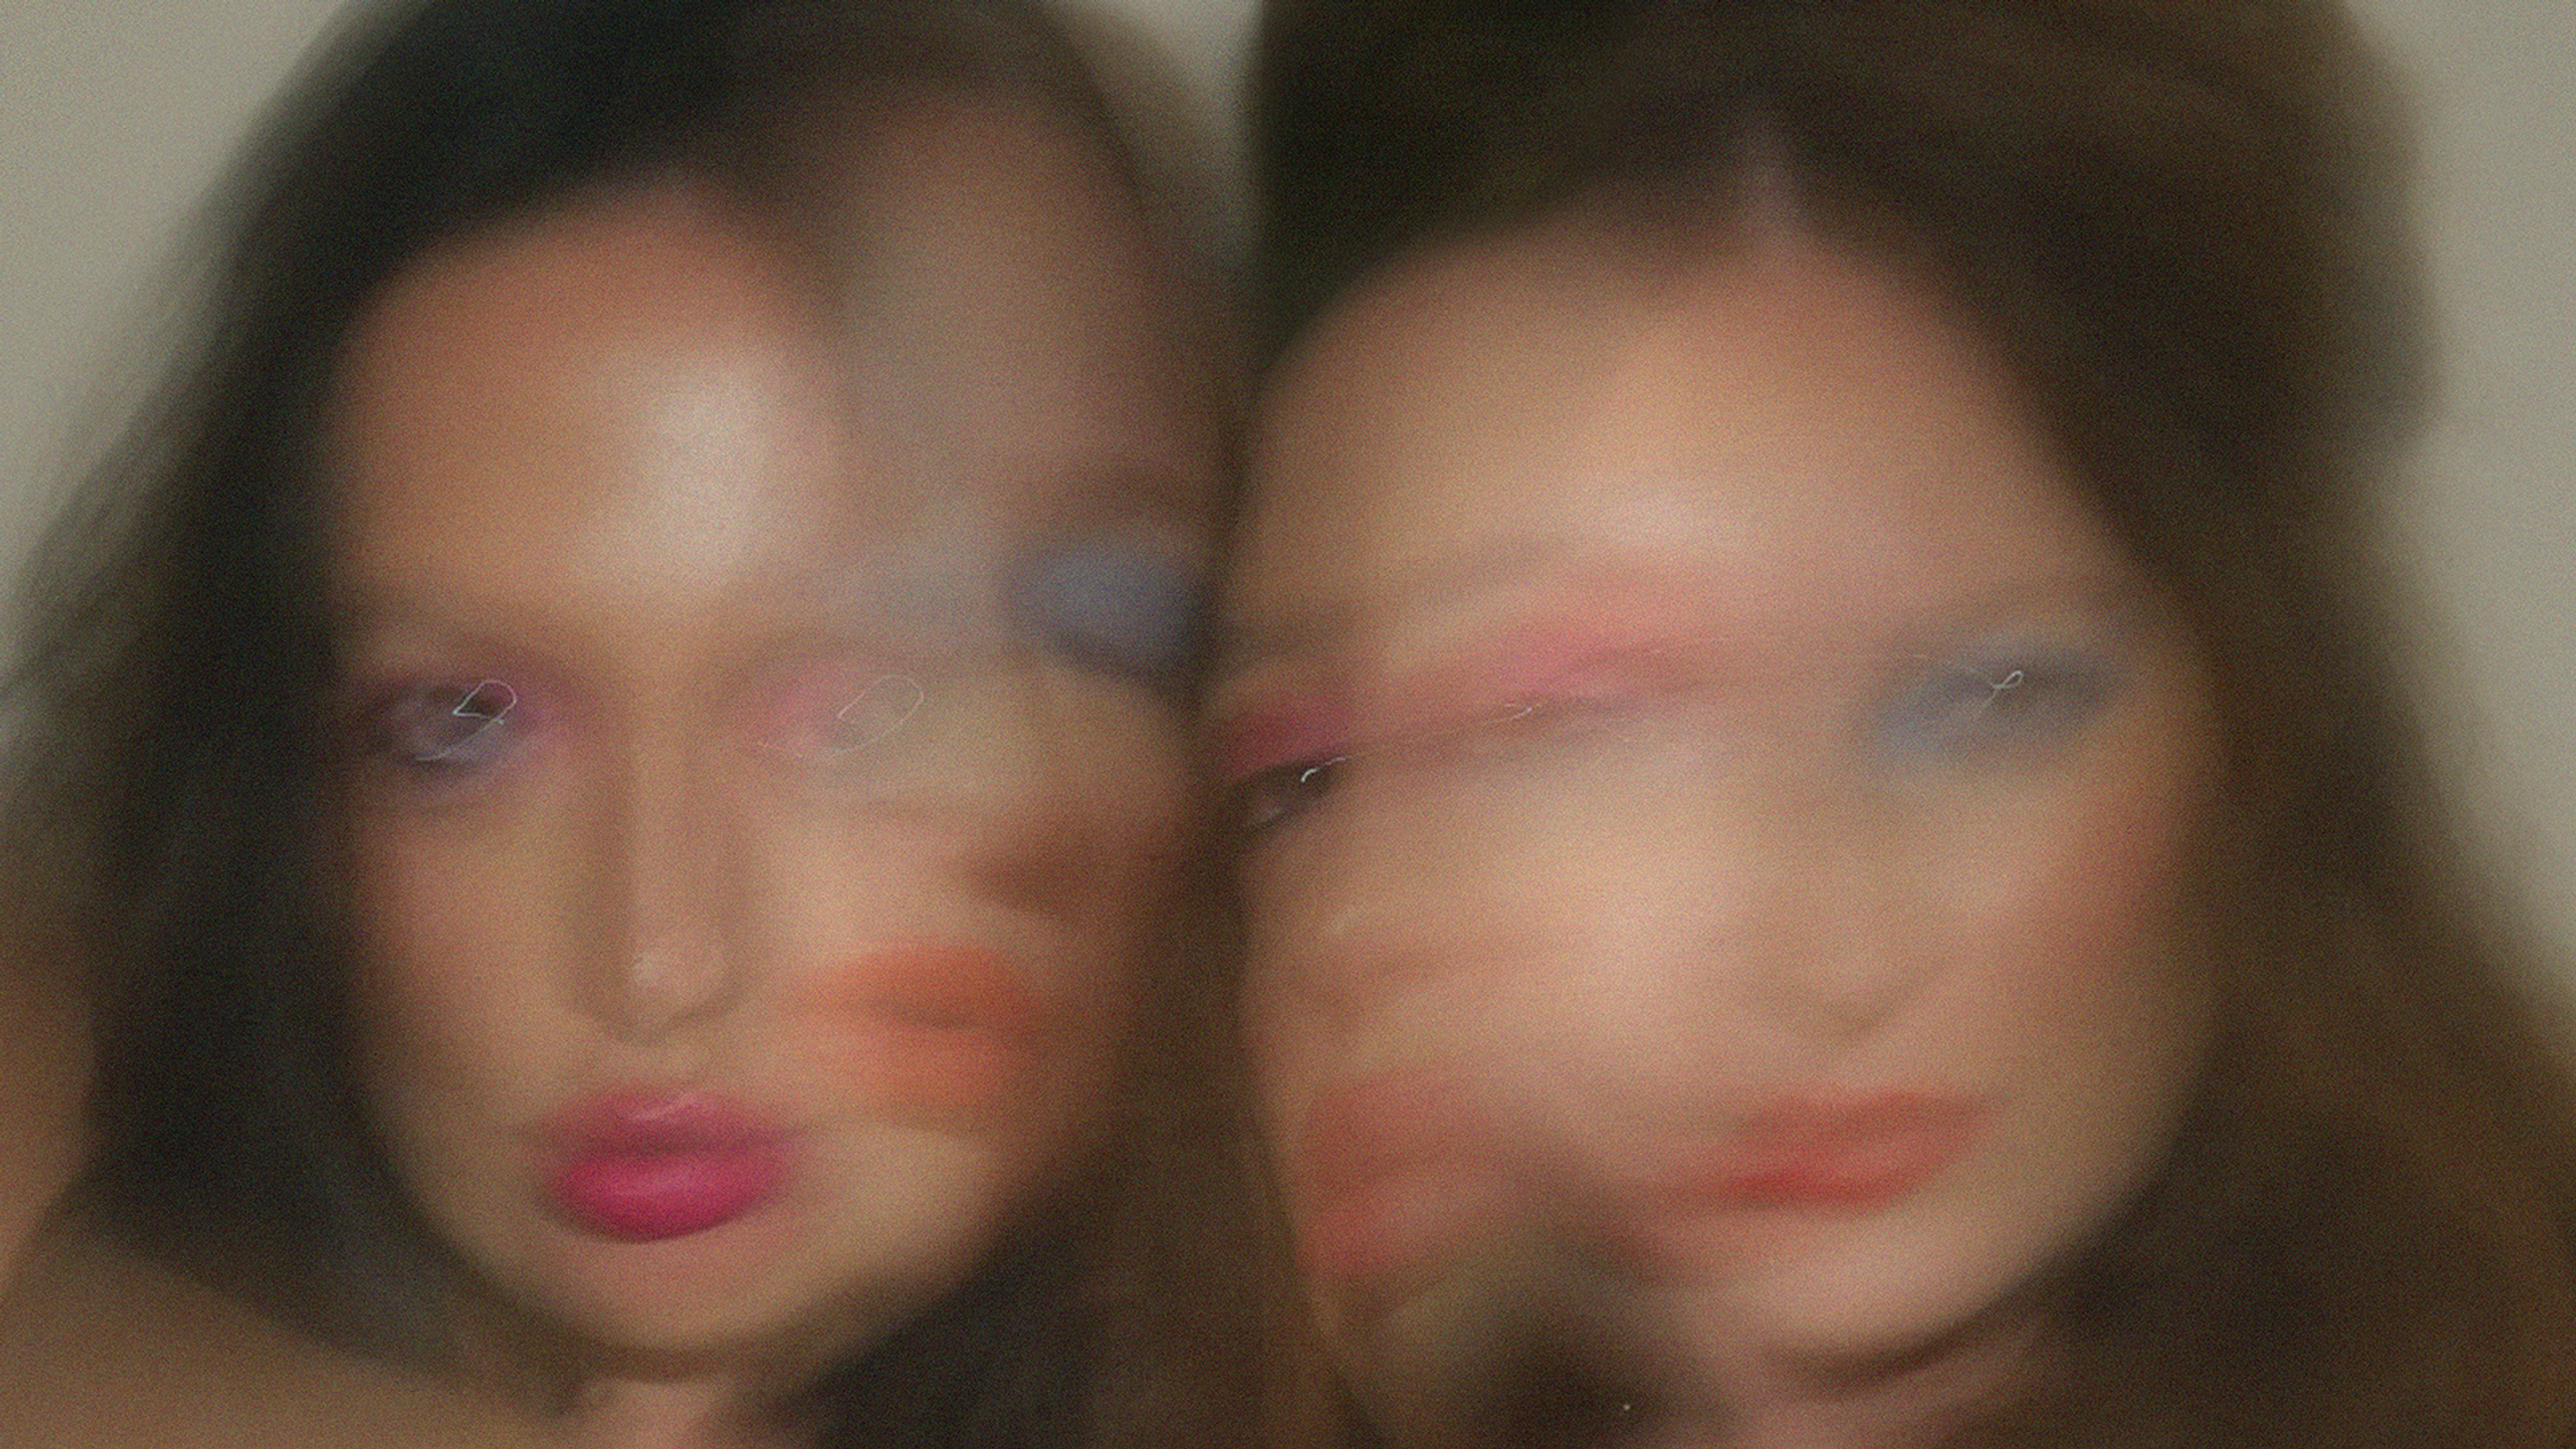 A layered image of two faces blurred 